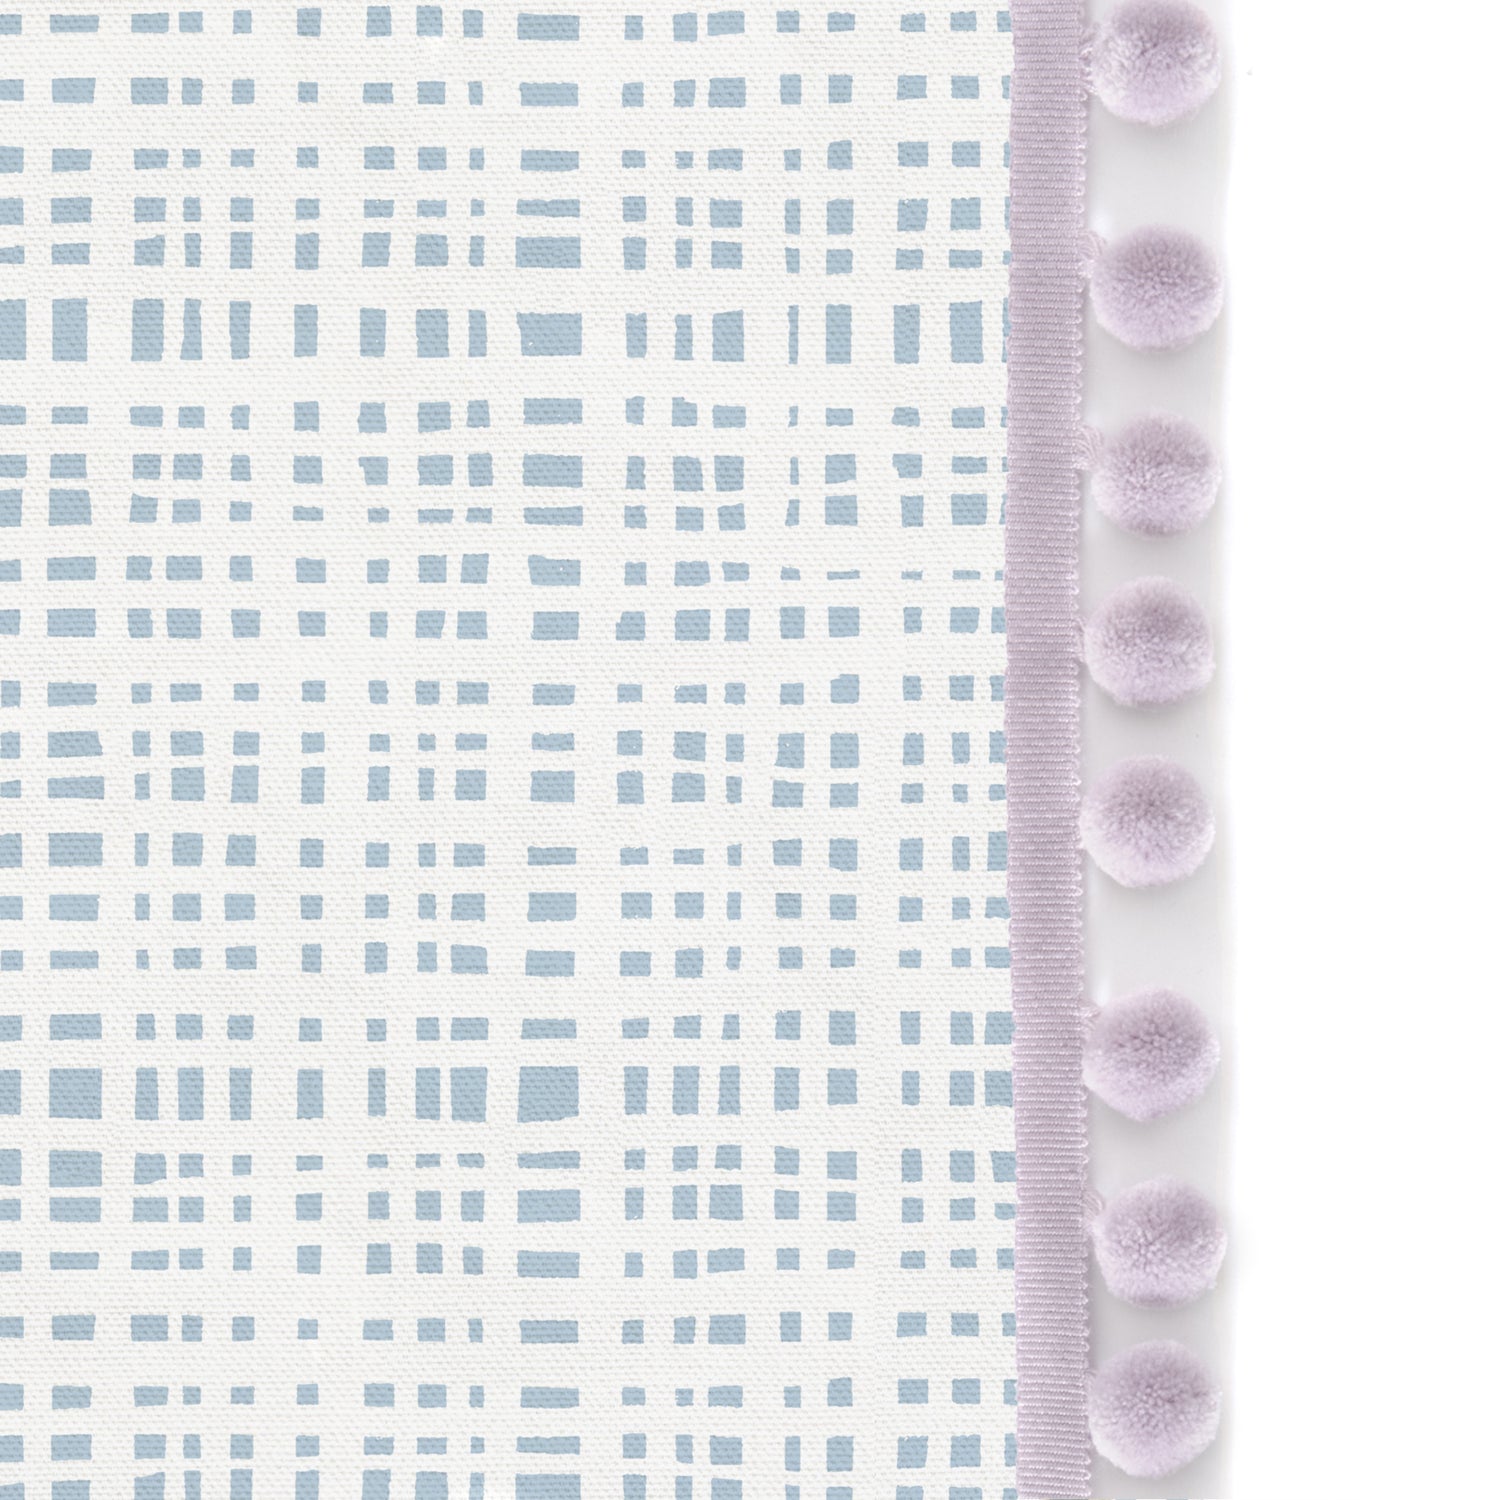 Upclose picture of Ginger Sky custom Sky Blue Ginghamcurtain with lilac pom pom trim